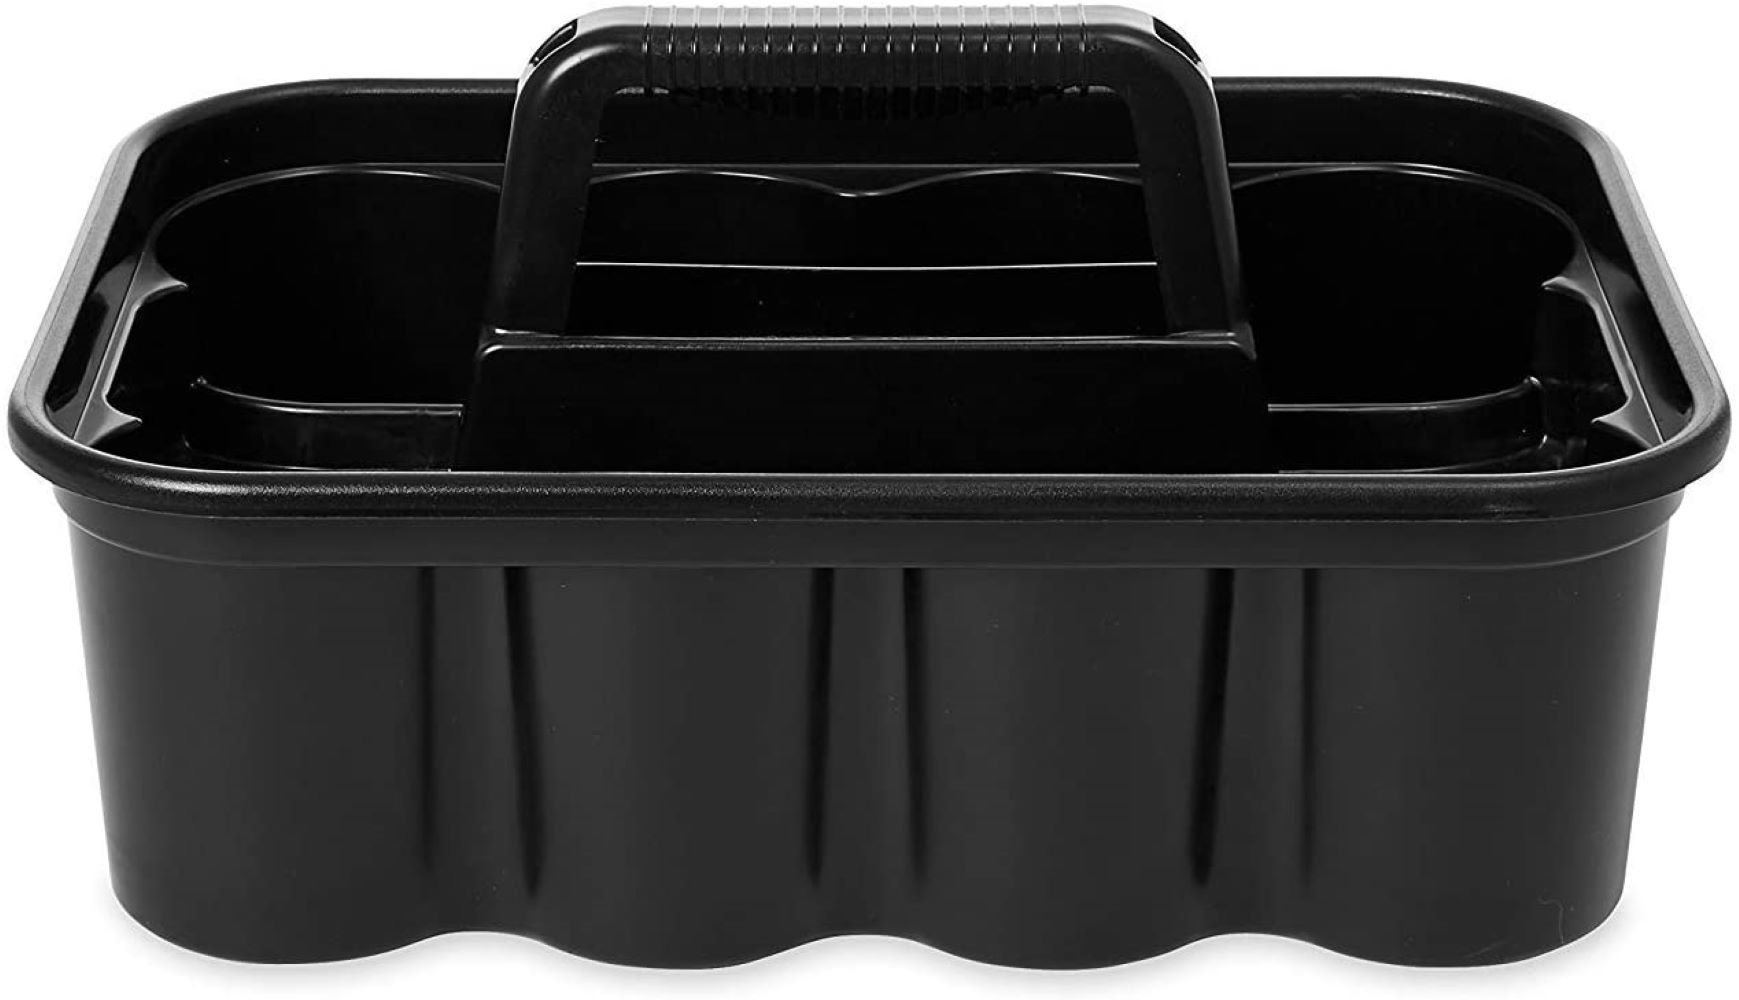 2 Rubbermaid Commercial Carry Cleaning Supplies Caddy Organizer Tote Heavy  Duty